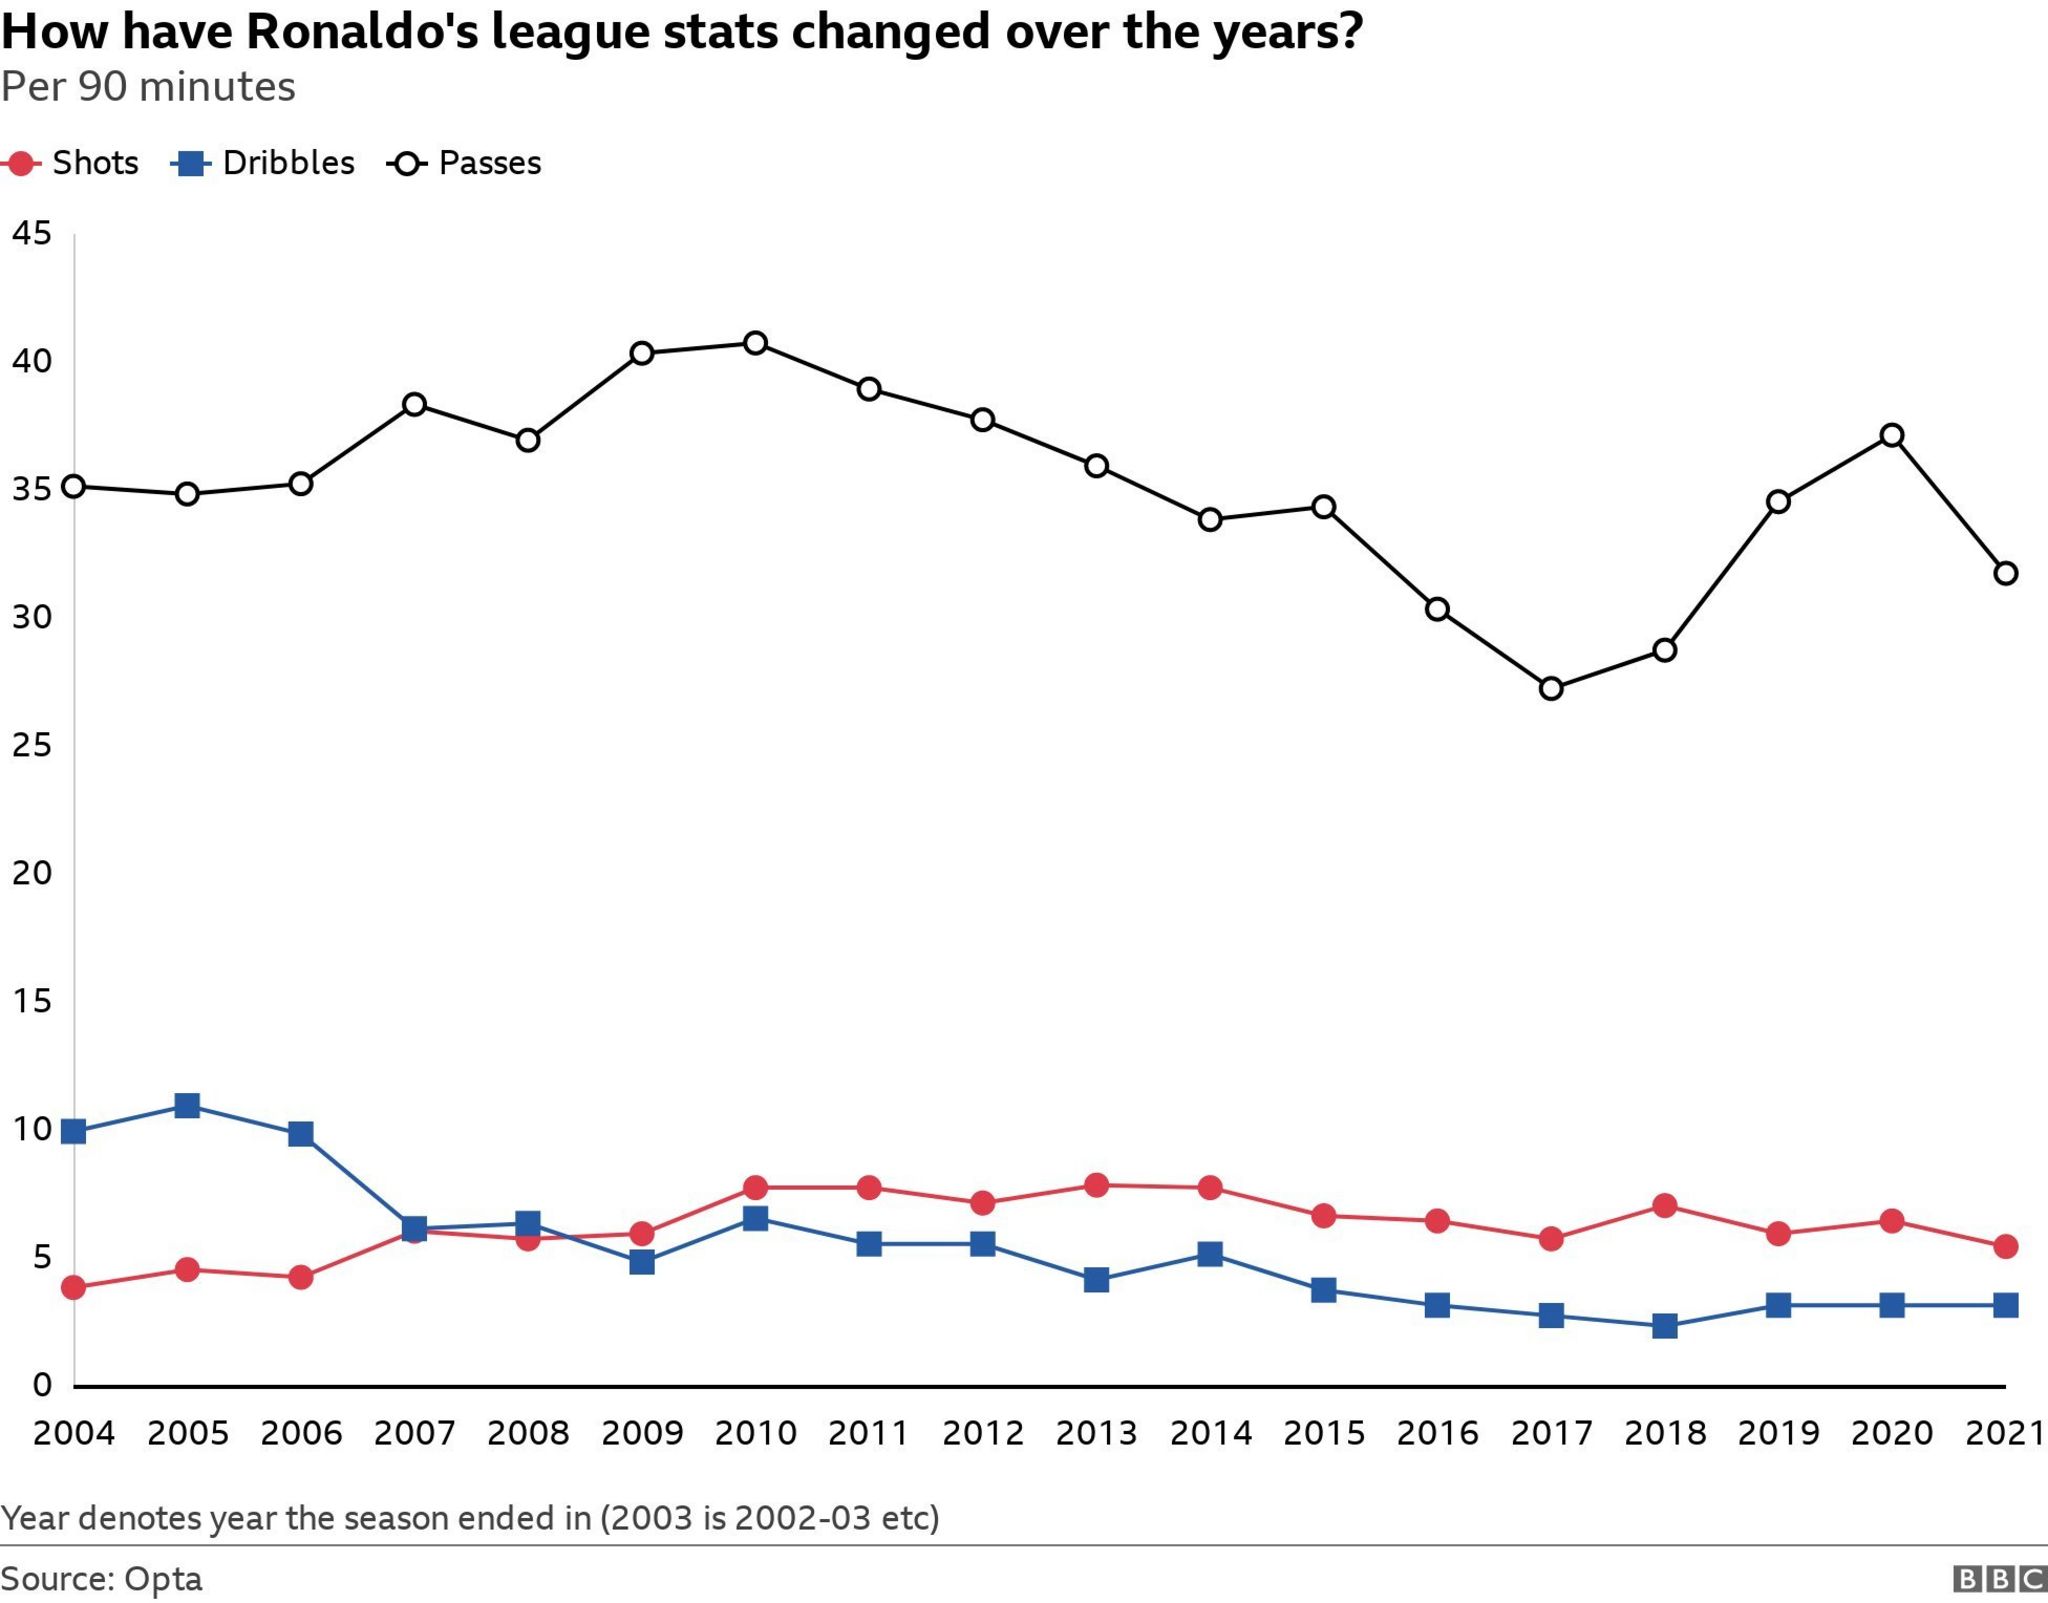 Graphic showing how Ronaldo's shots, assists and passes per 90 minutes have risen and dipped